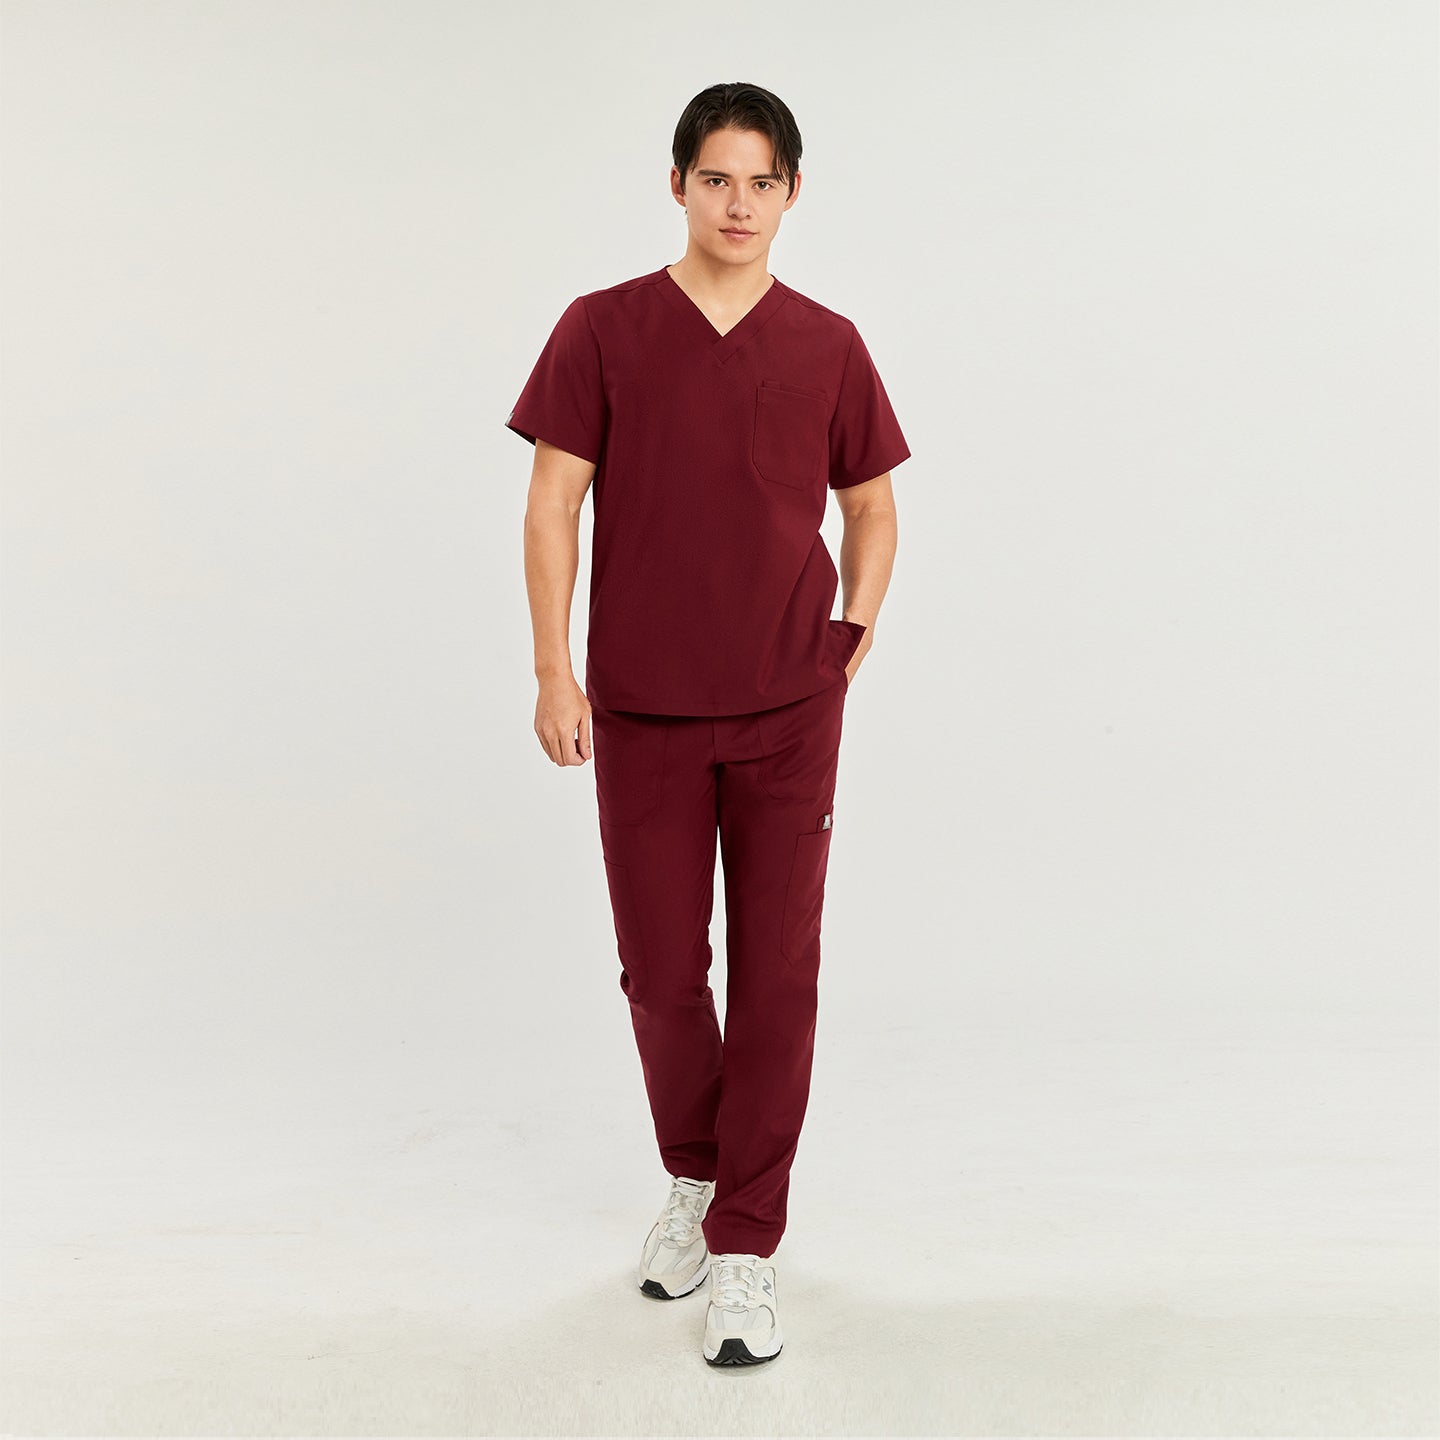 Male model wearing a scrub top with a chest pocket, paired with matching scrub pants and white sneakers, standing with one hand in his pocket,Burgundy